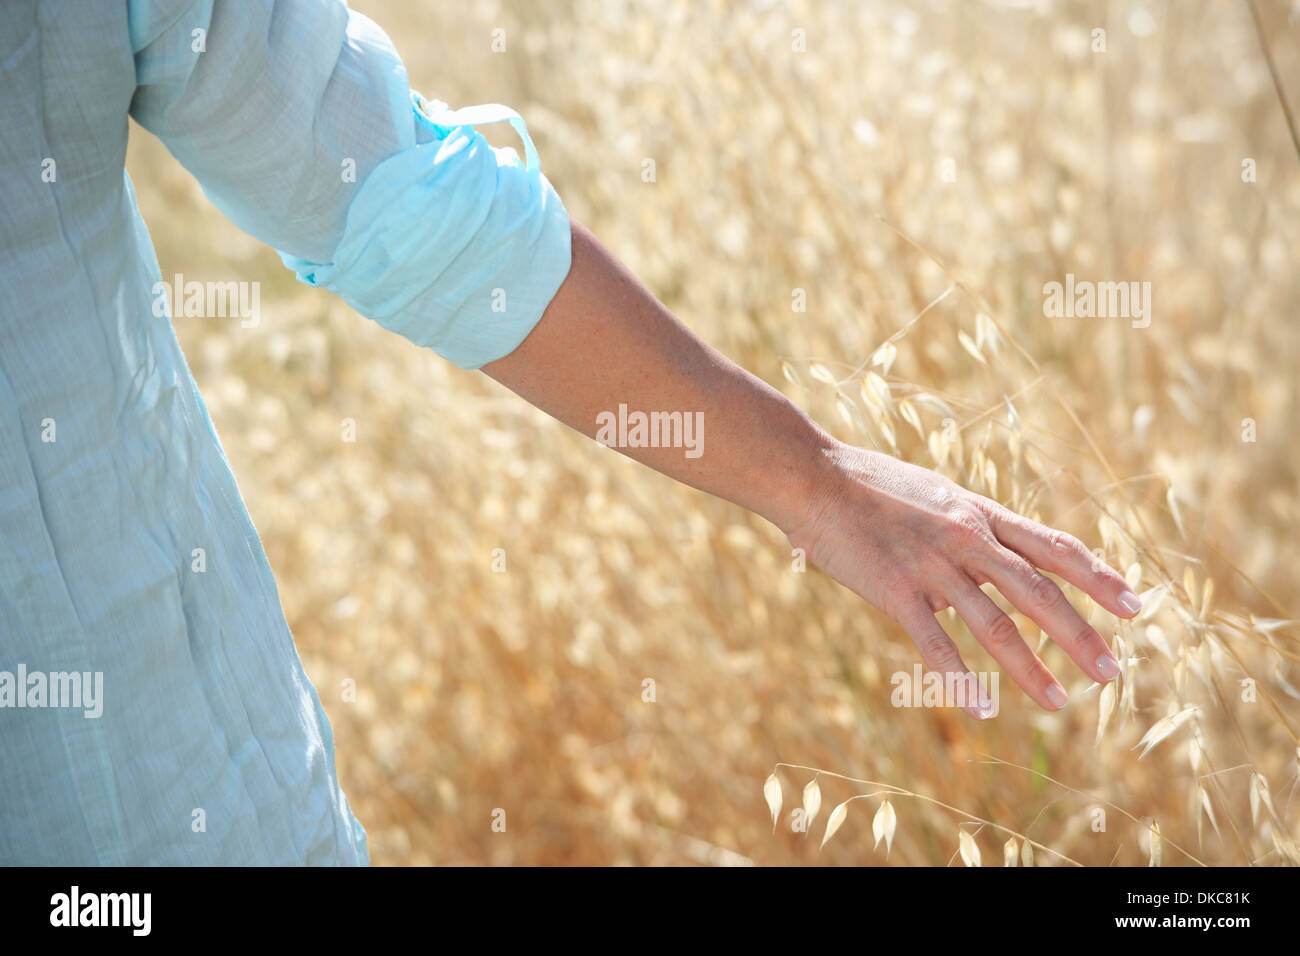 Cropped image of woman's hand in corn field Stock Photo